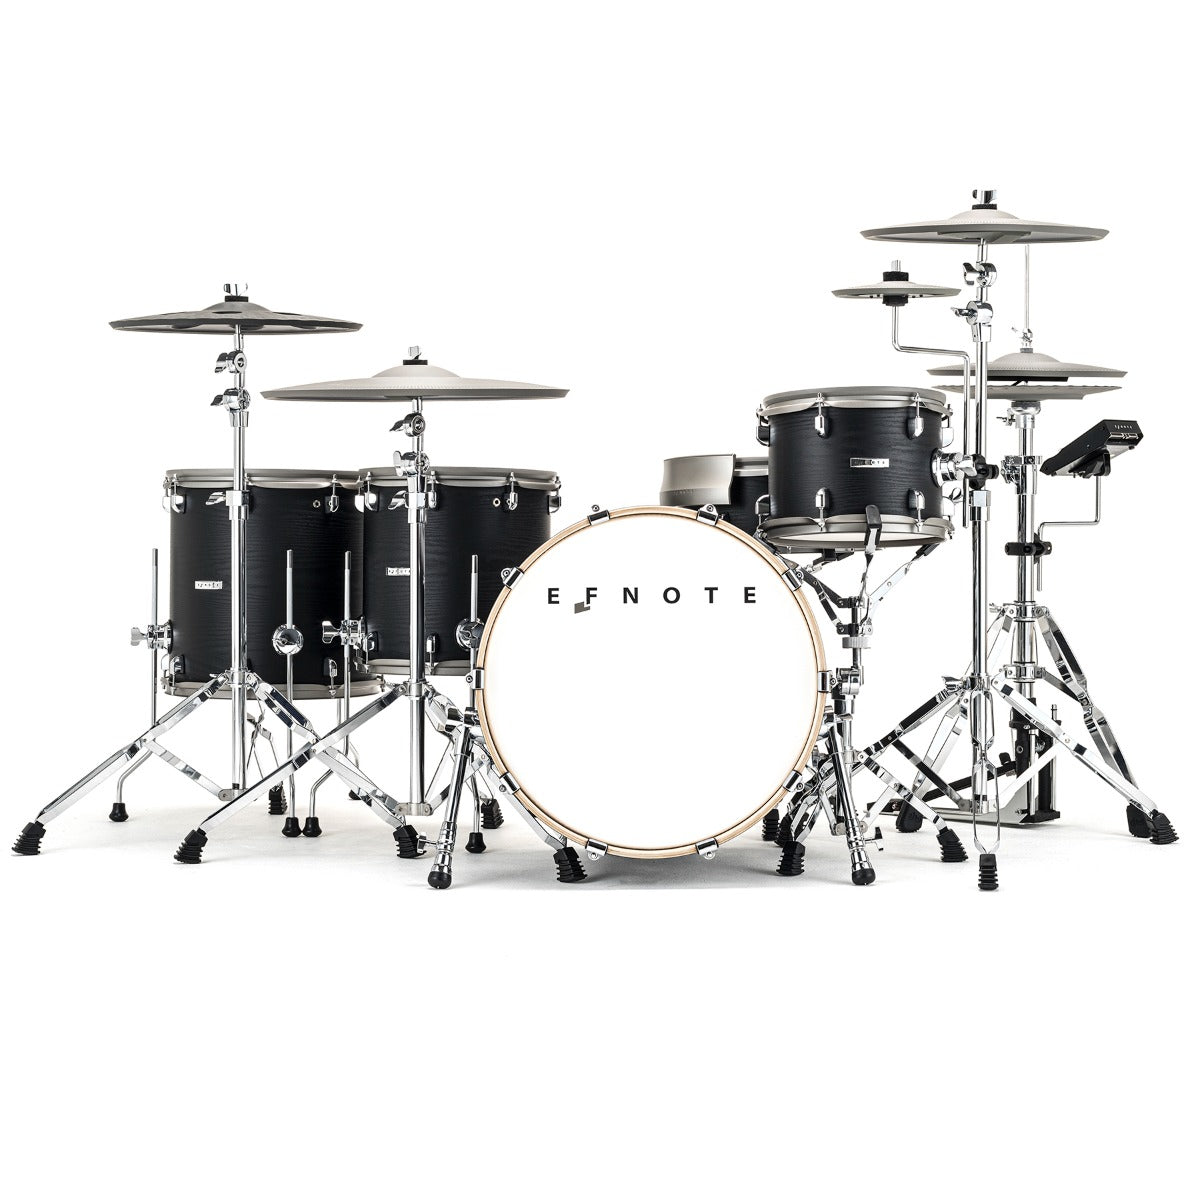 EFNOTE 7X Electronic Drum Set view 1